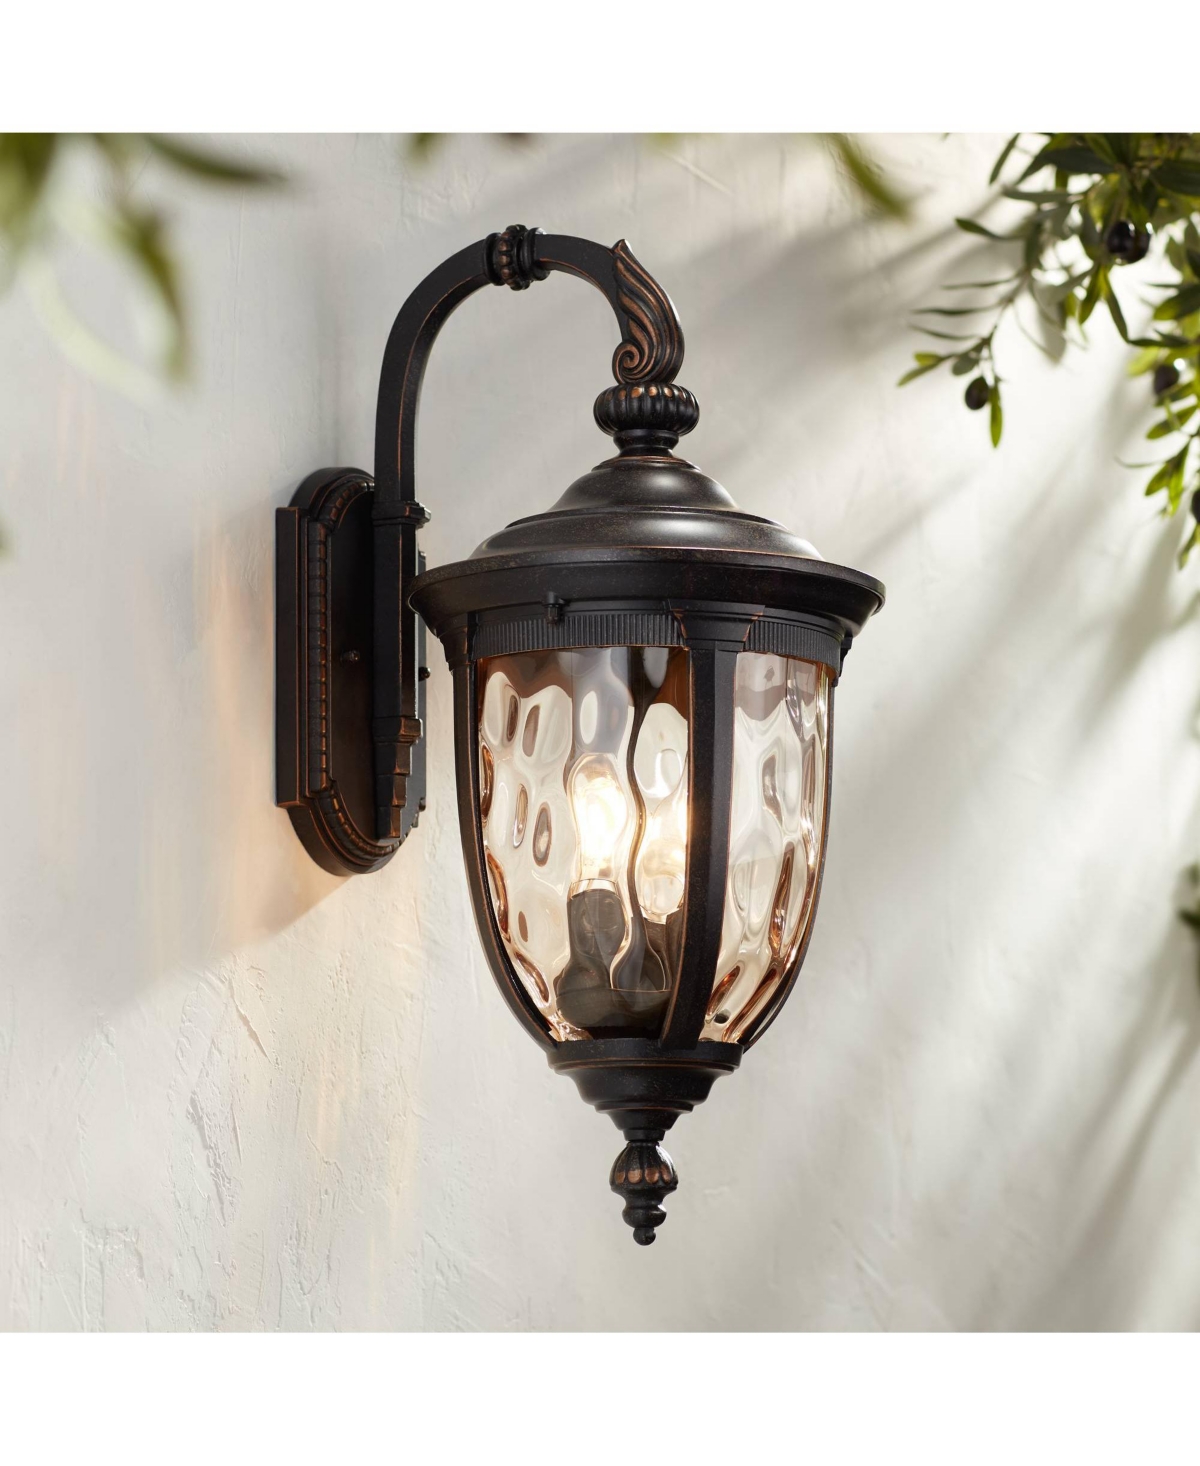 Bellagio Vintage-like Outdoor Wall Light Fixture Bronze Brown Metal 20 1/2" Champagne Hammered Glass Curved Arm for House Porch Patio Outside Deck Gar